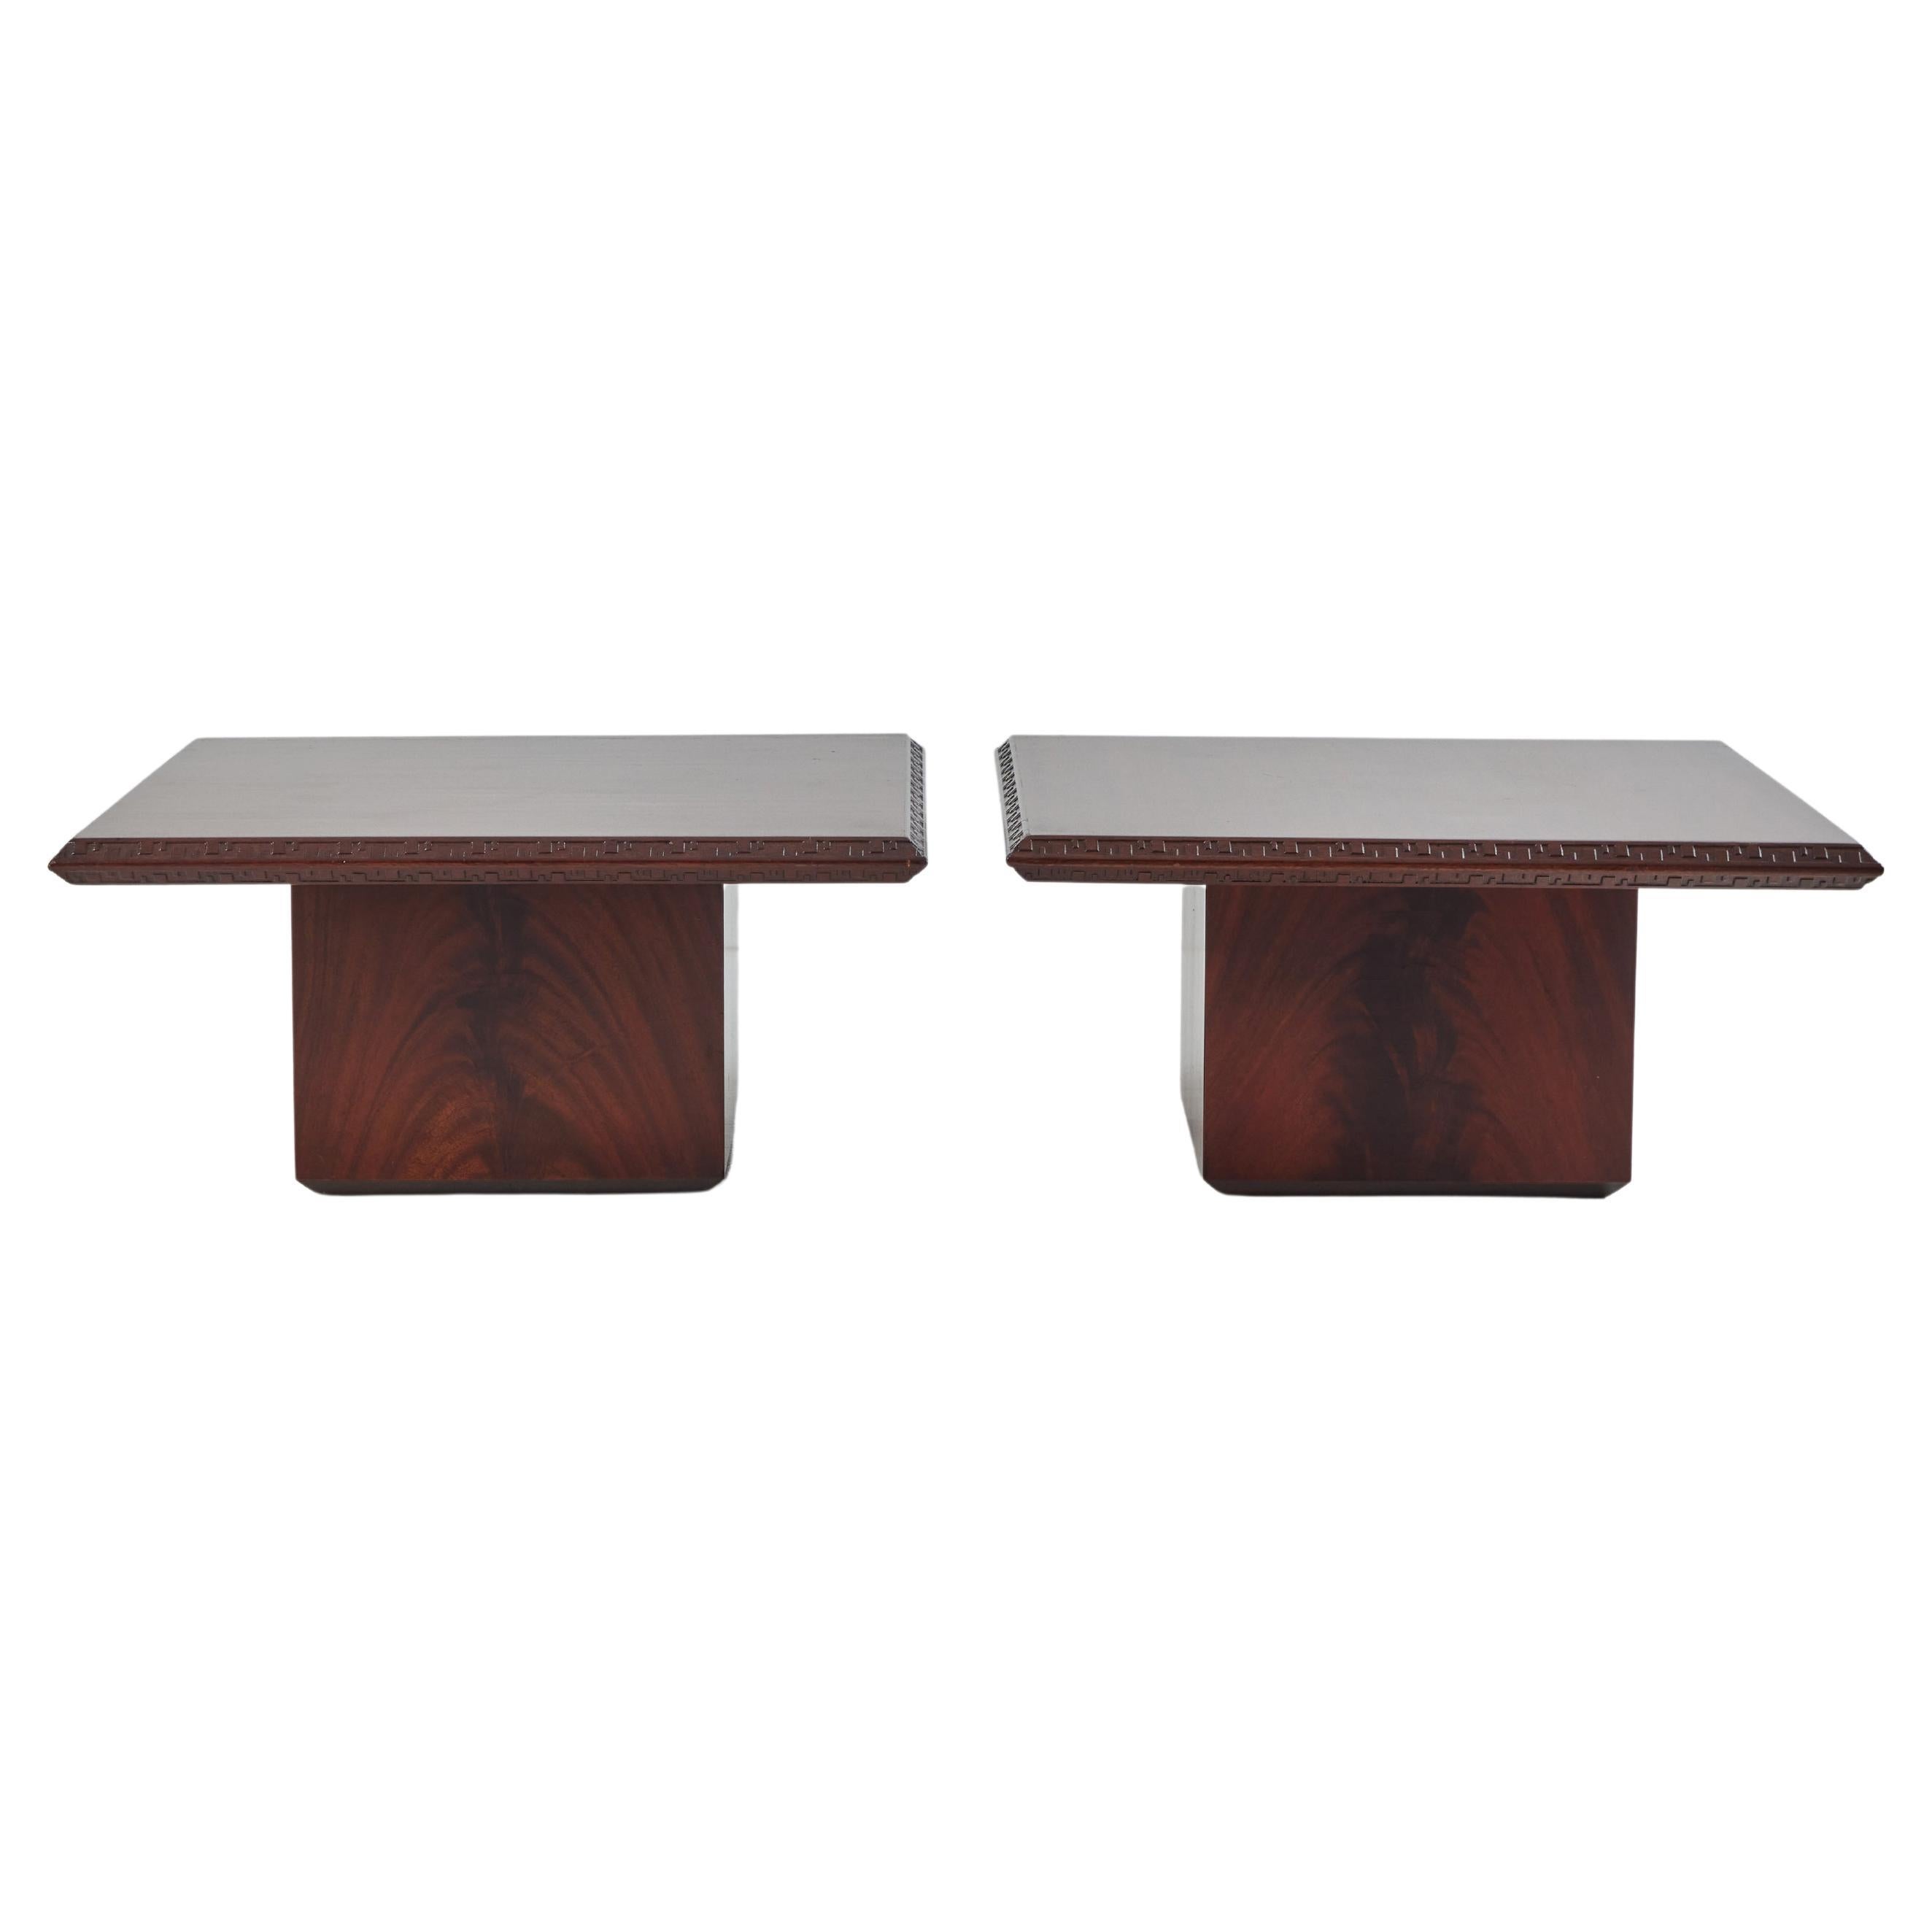 A Pair of Taliesin Low Cocktail Tables, Frank Loyd Right, 1955 For Sale